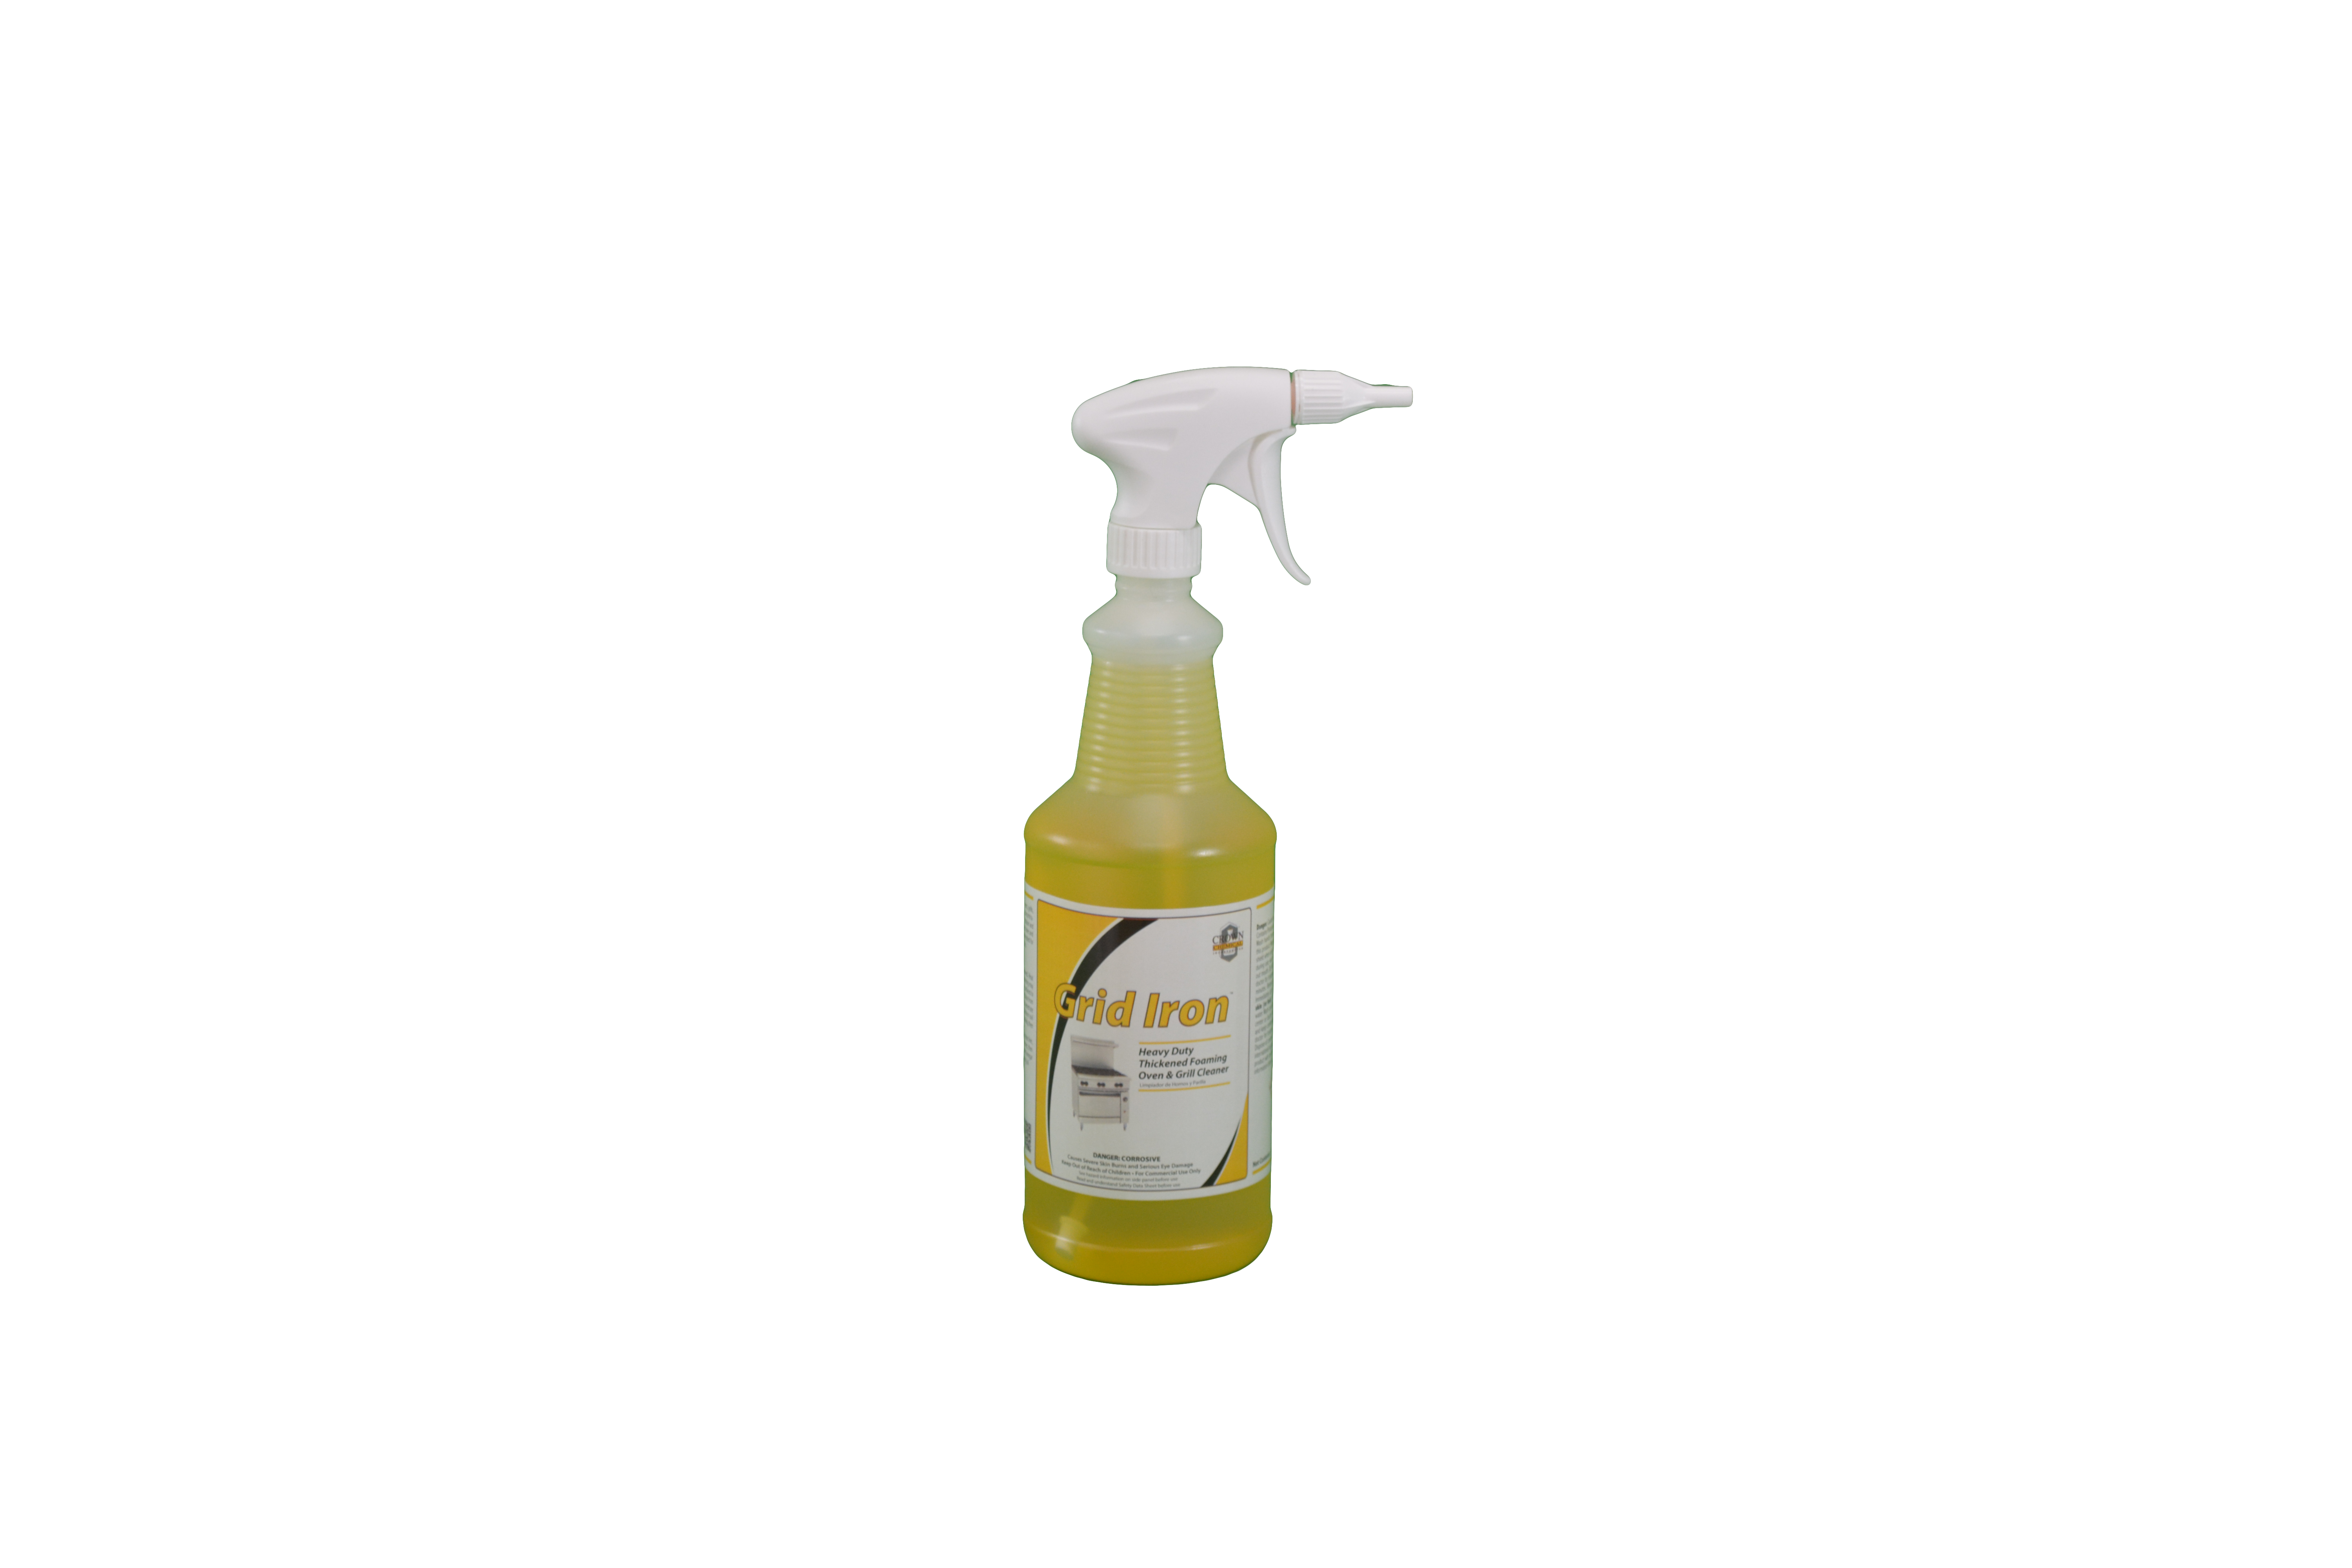 FUGACLEAN concentrated grout cleaner – Diana Diamanta SHOP